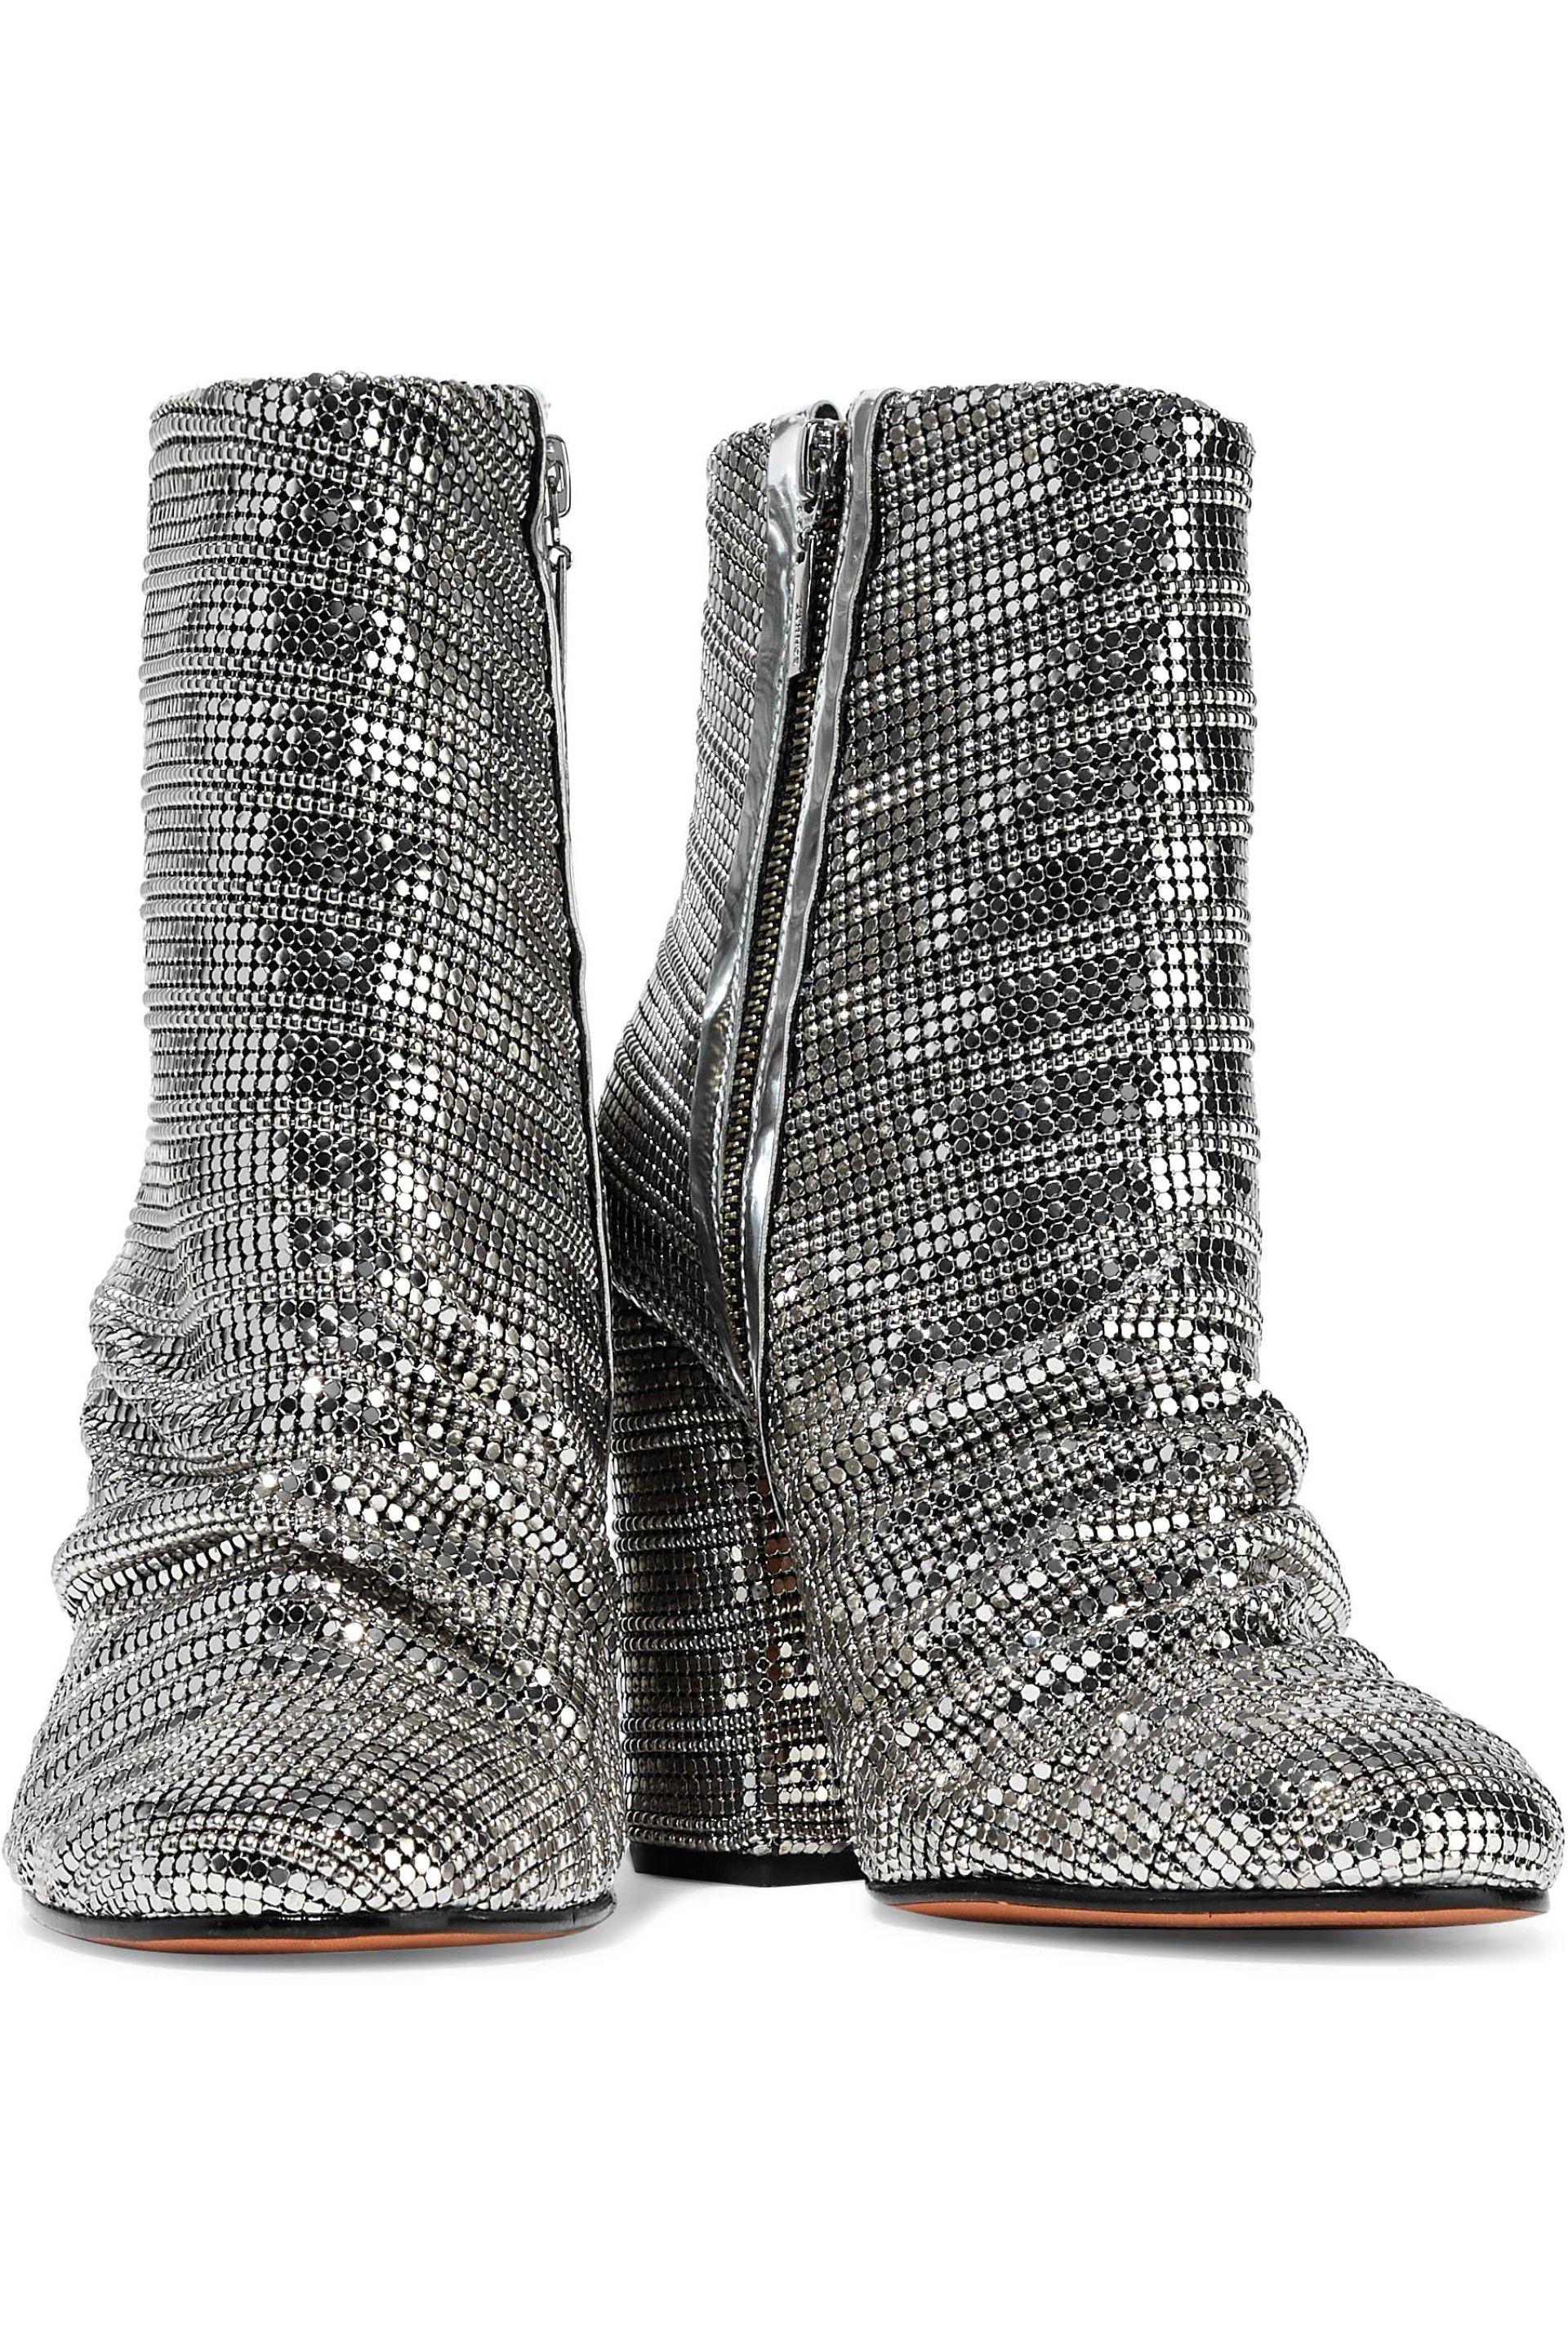 SCHUTZ SHOES Chainmail Ankle Boots Silver in Metallic | Lyst